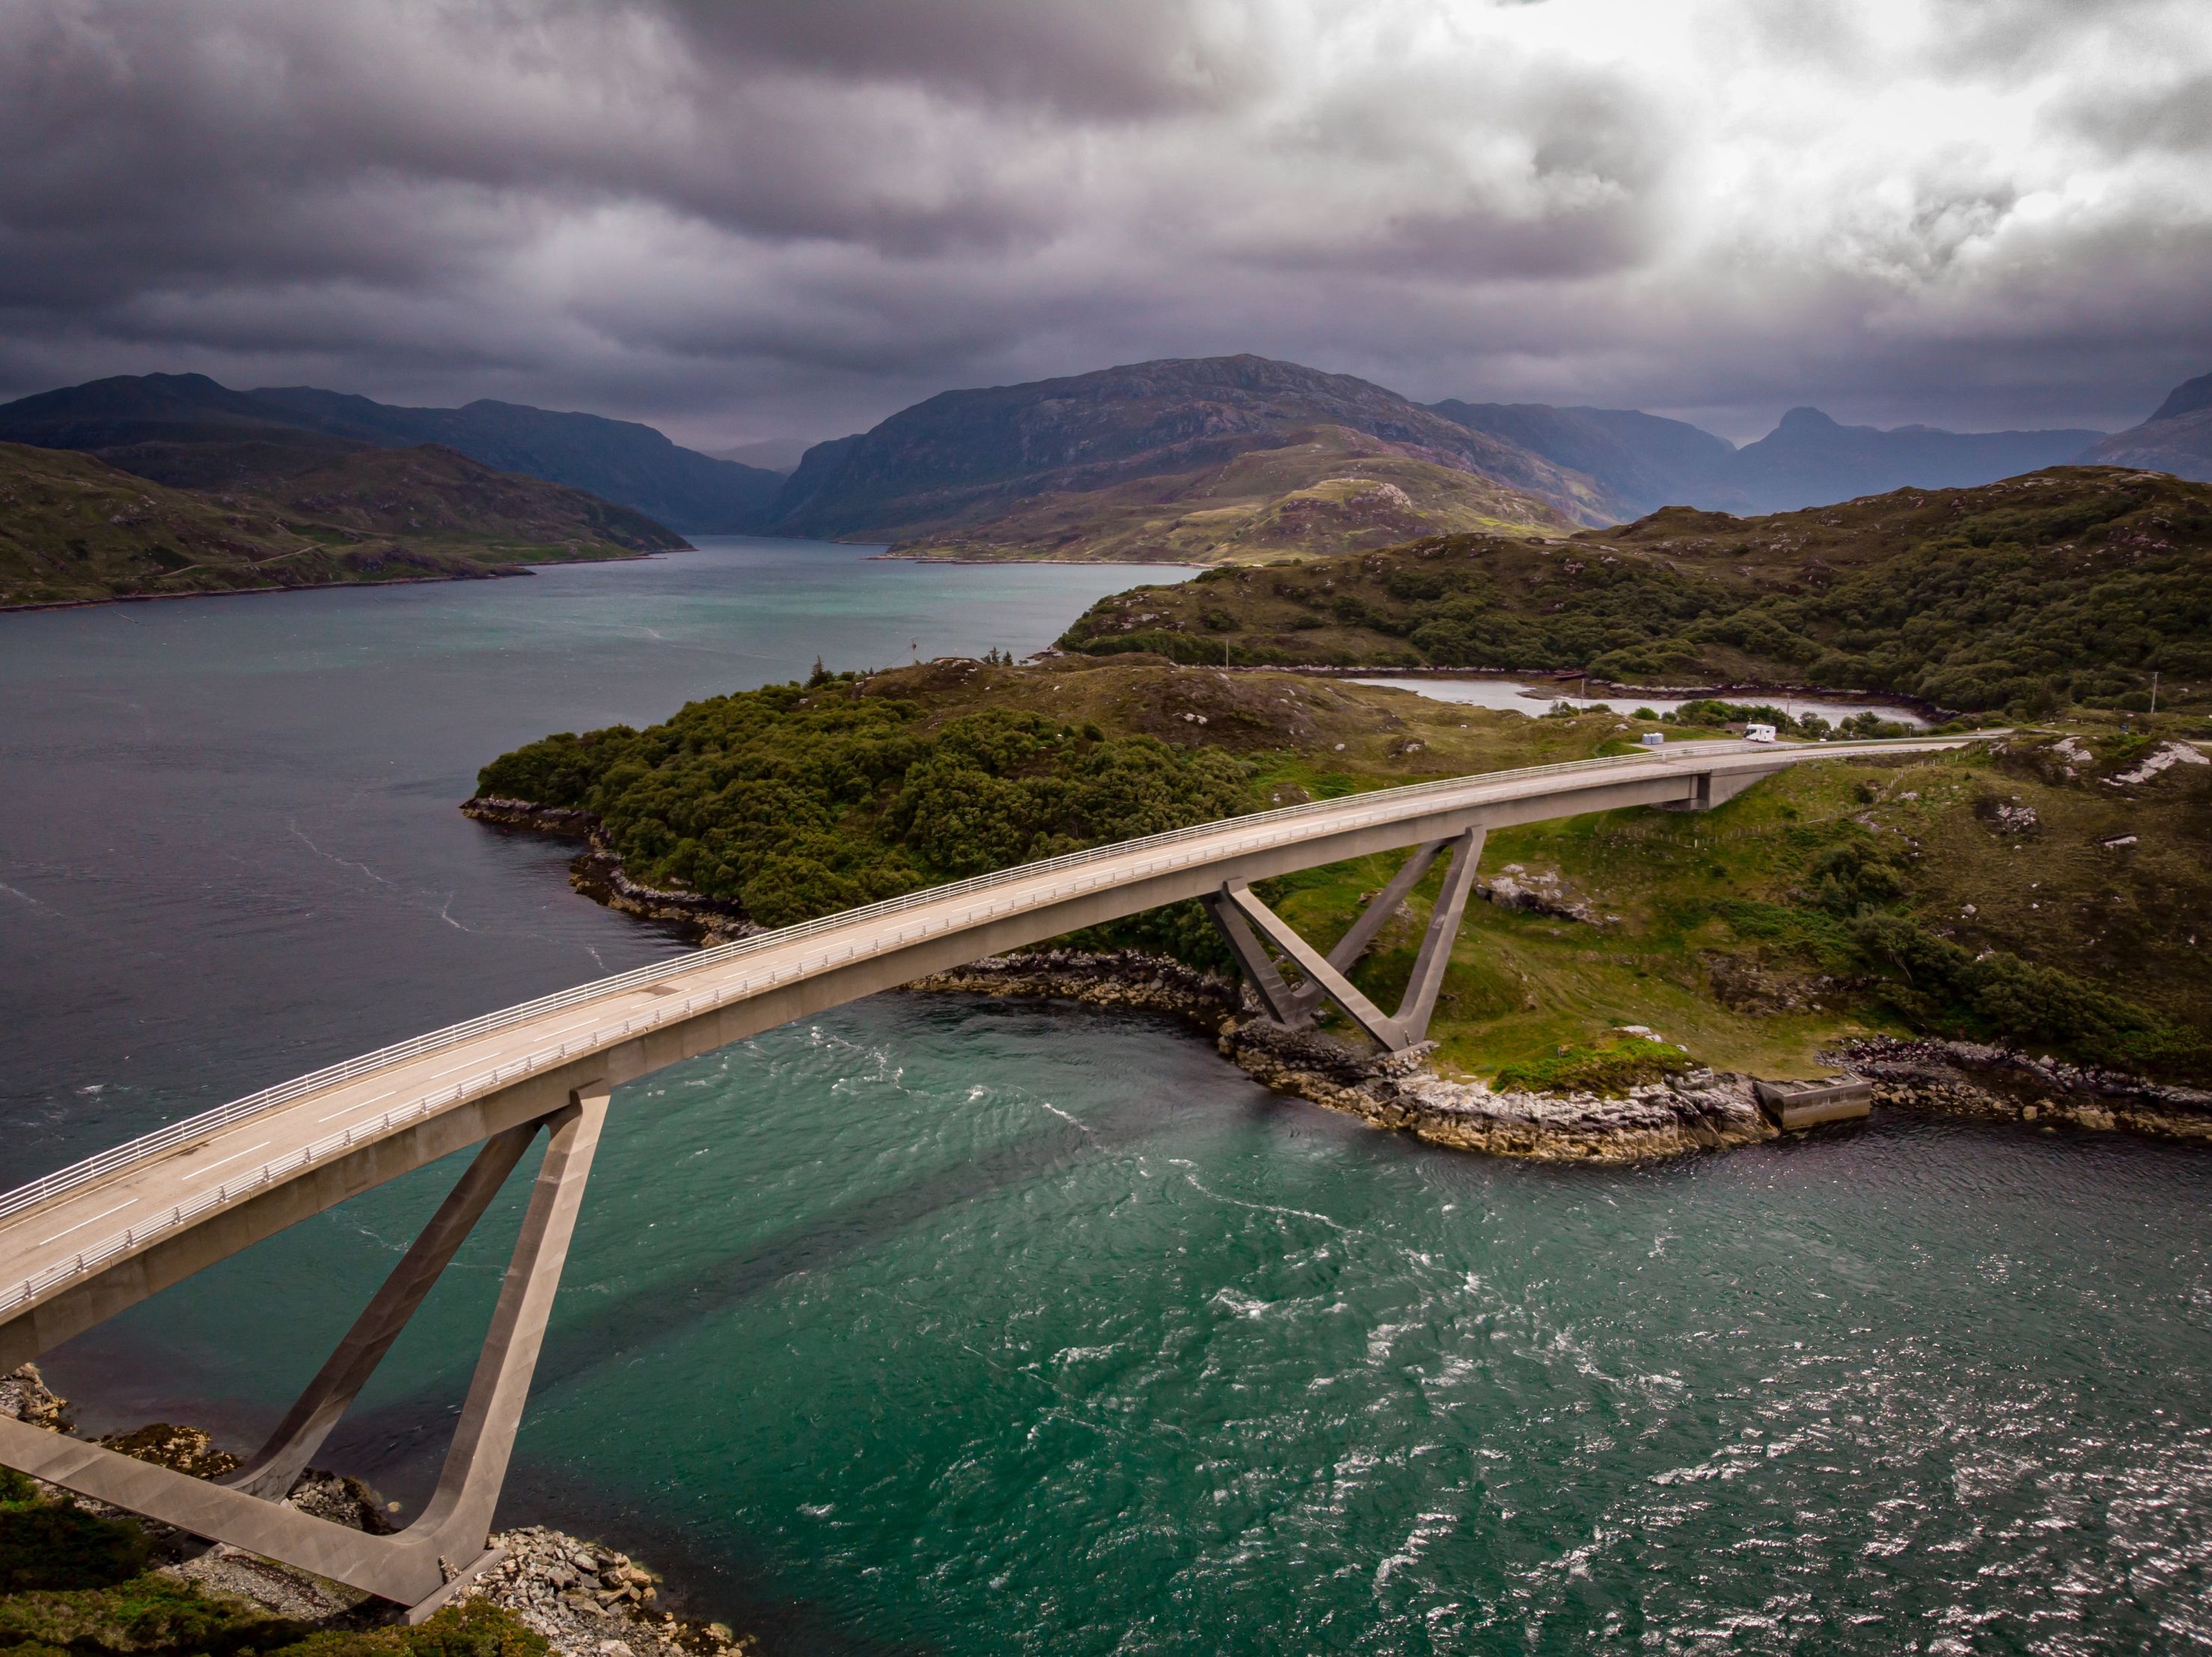 The remarkable Kylesku Bridge between Loch a’ Chairn Bhain and Loch Gleann Dubh, on the North Coast 500 cycling route.